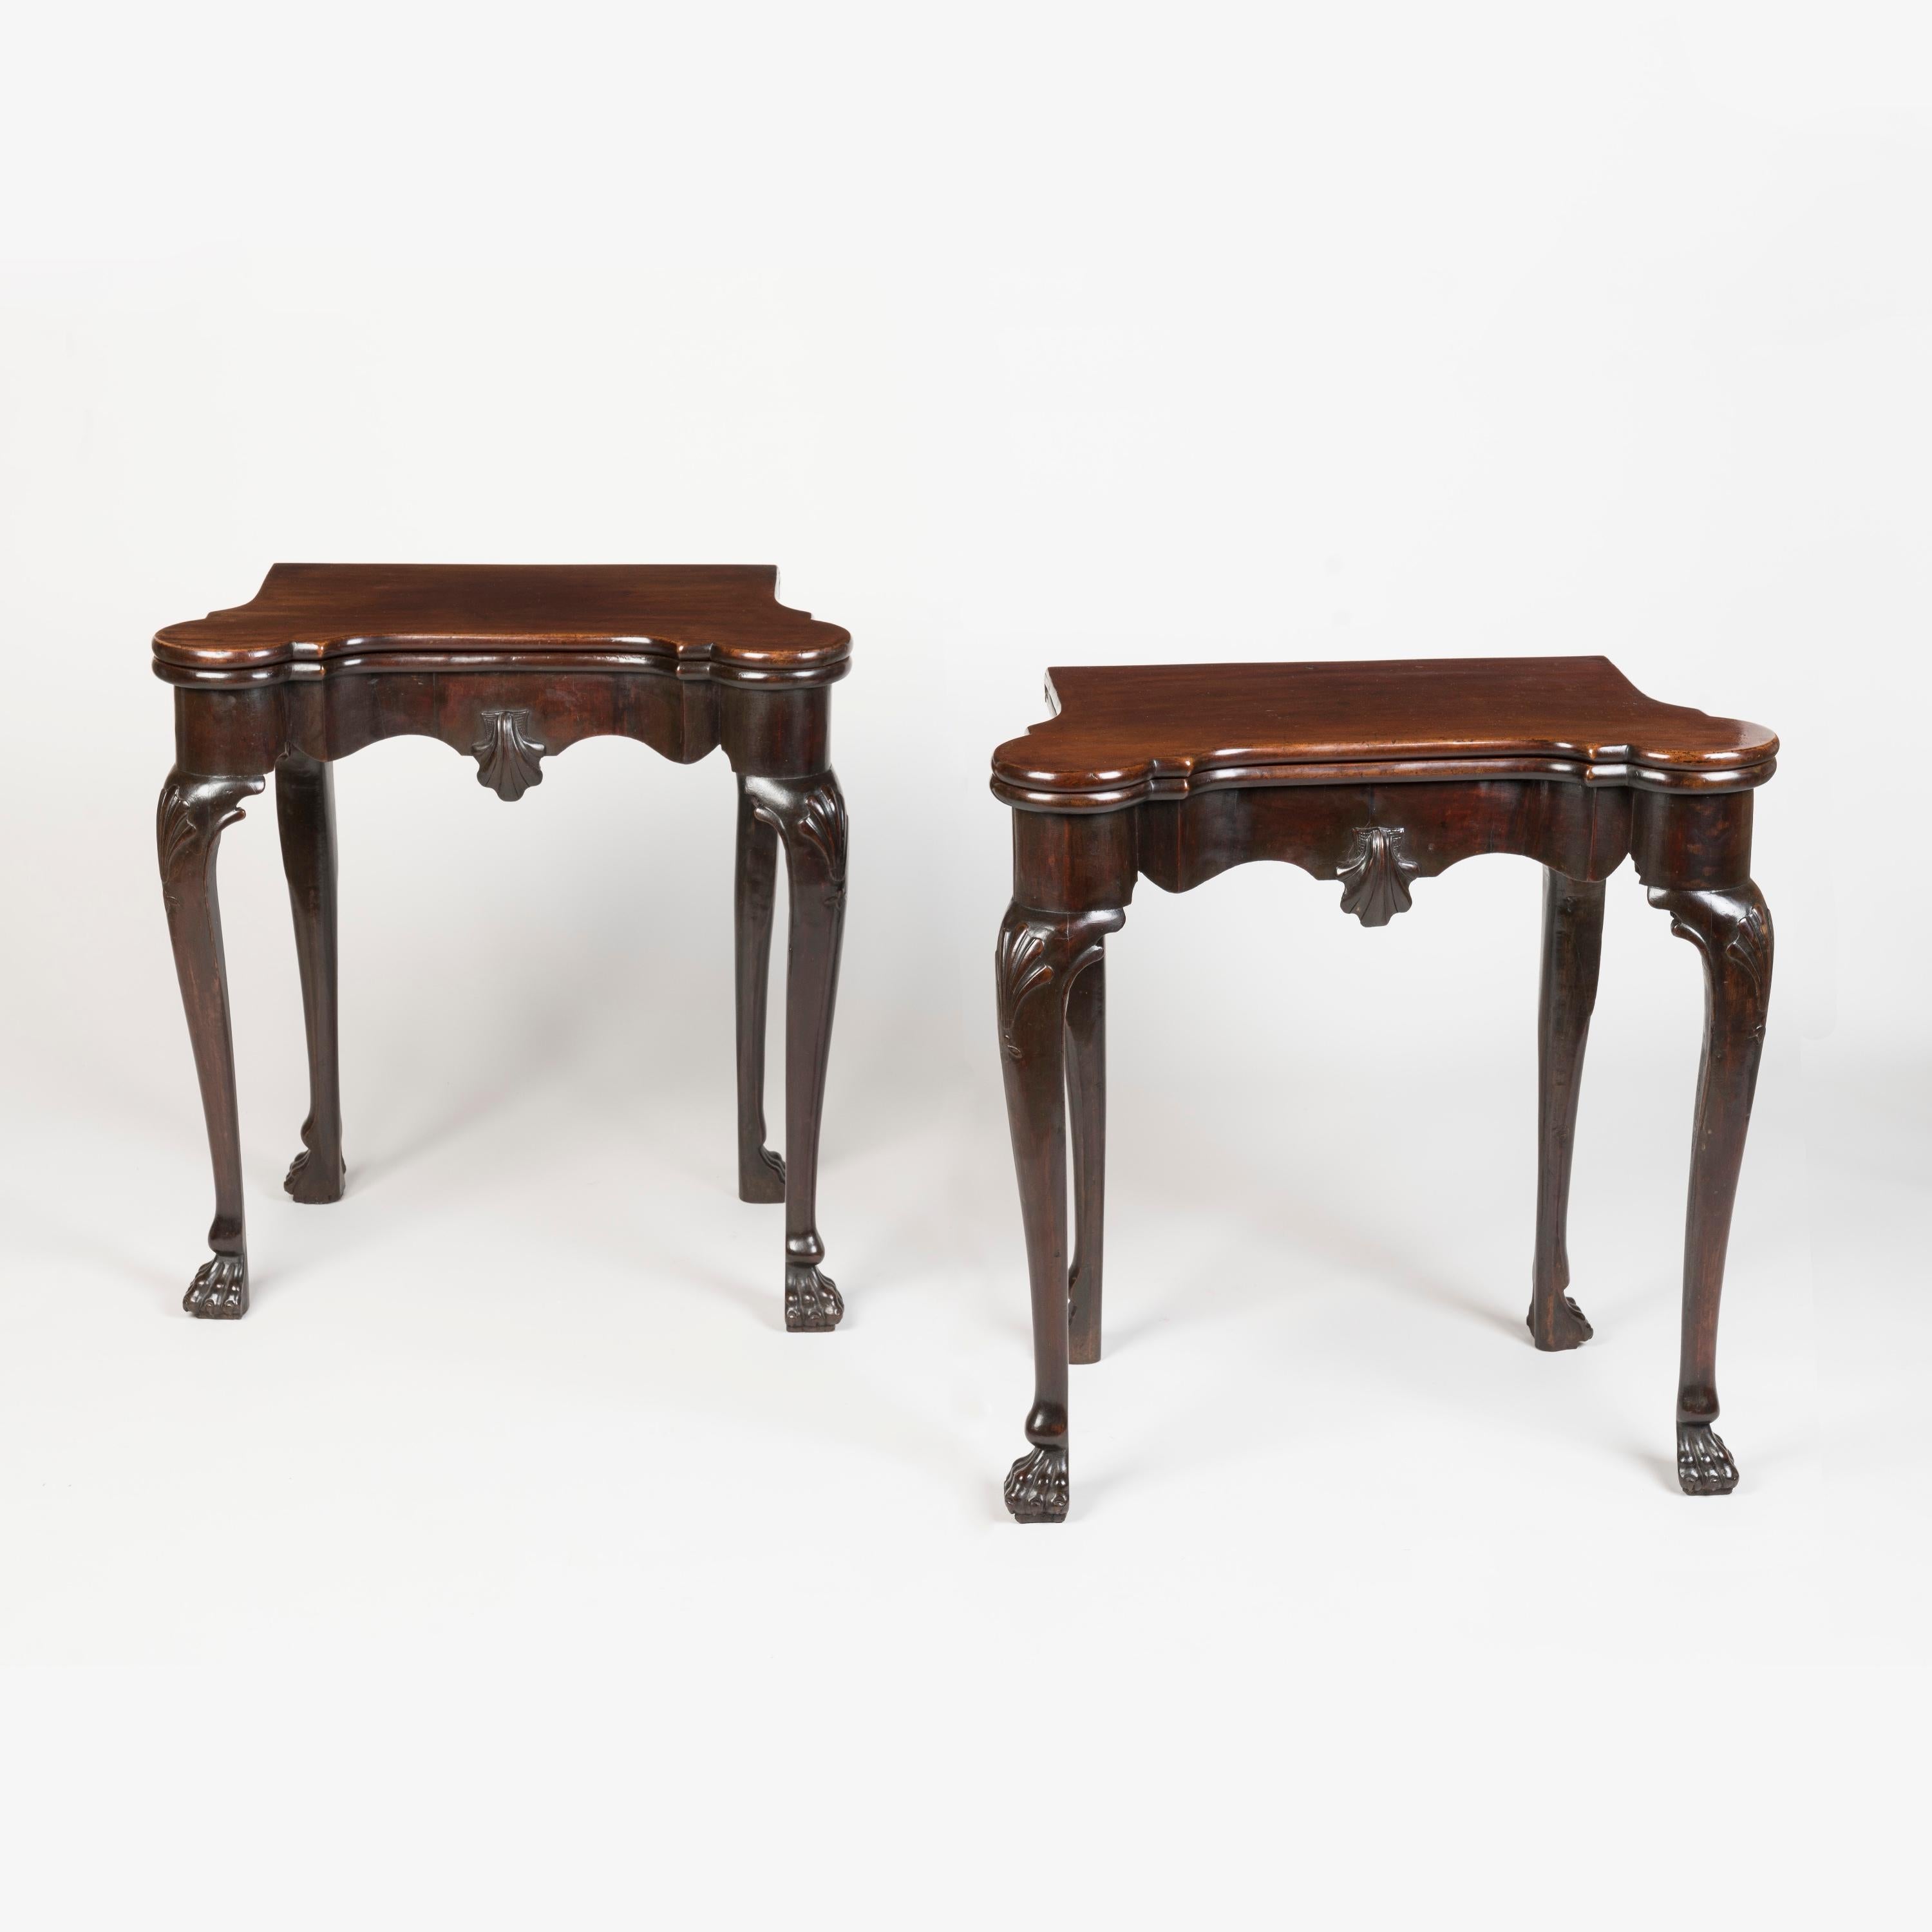 A Pair of Irish George II Mahogany Card Tables

Of unusually small size, the eighteenth-century folding card tables of rich and dark timber, on elegantly drawn shell-carved cabriole legs terminating in lion's paw feet; the shaped apron with a